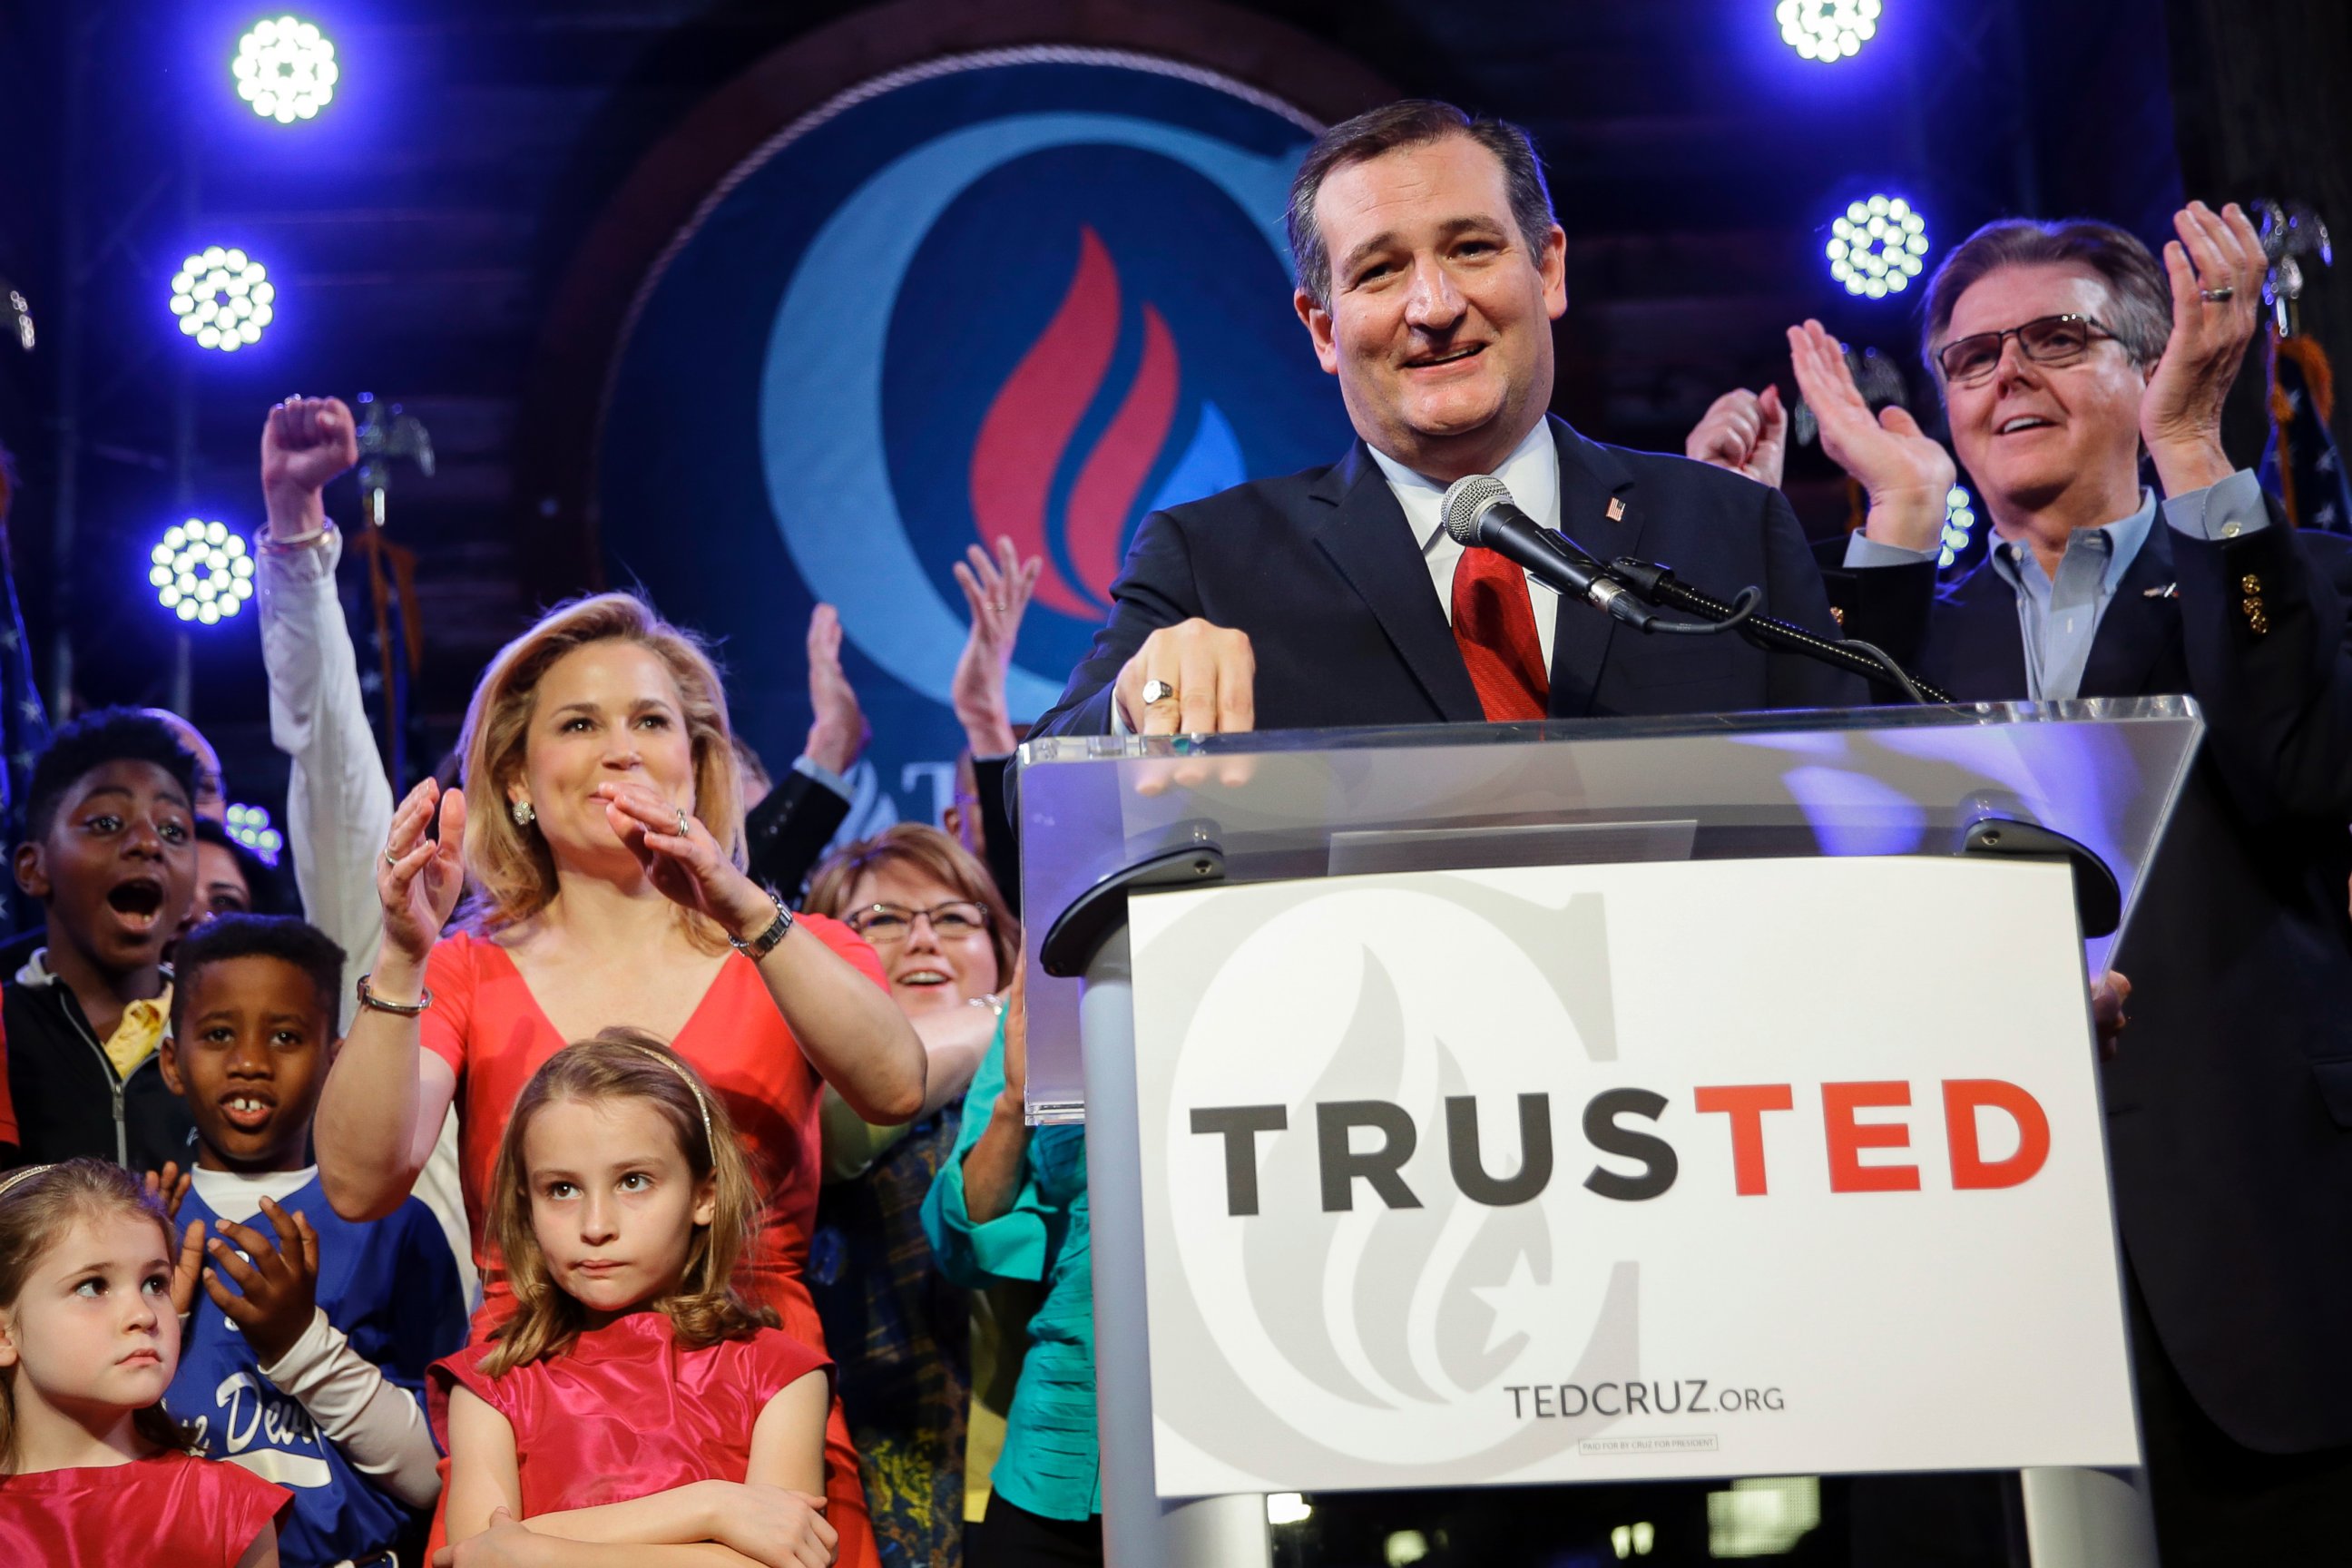 PHOTO: Sen. Ted Cruz addresses the crowd during an election night watch party, March 1, 2016 in Stafford, Texas.